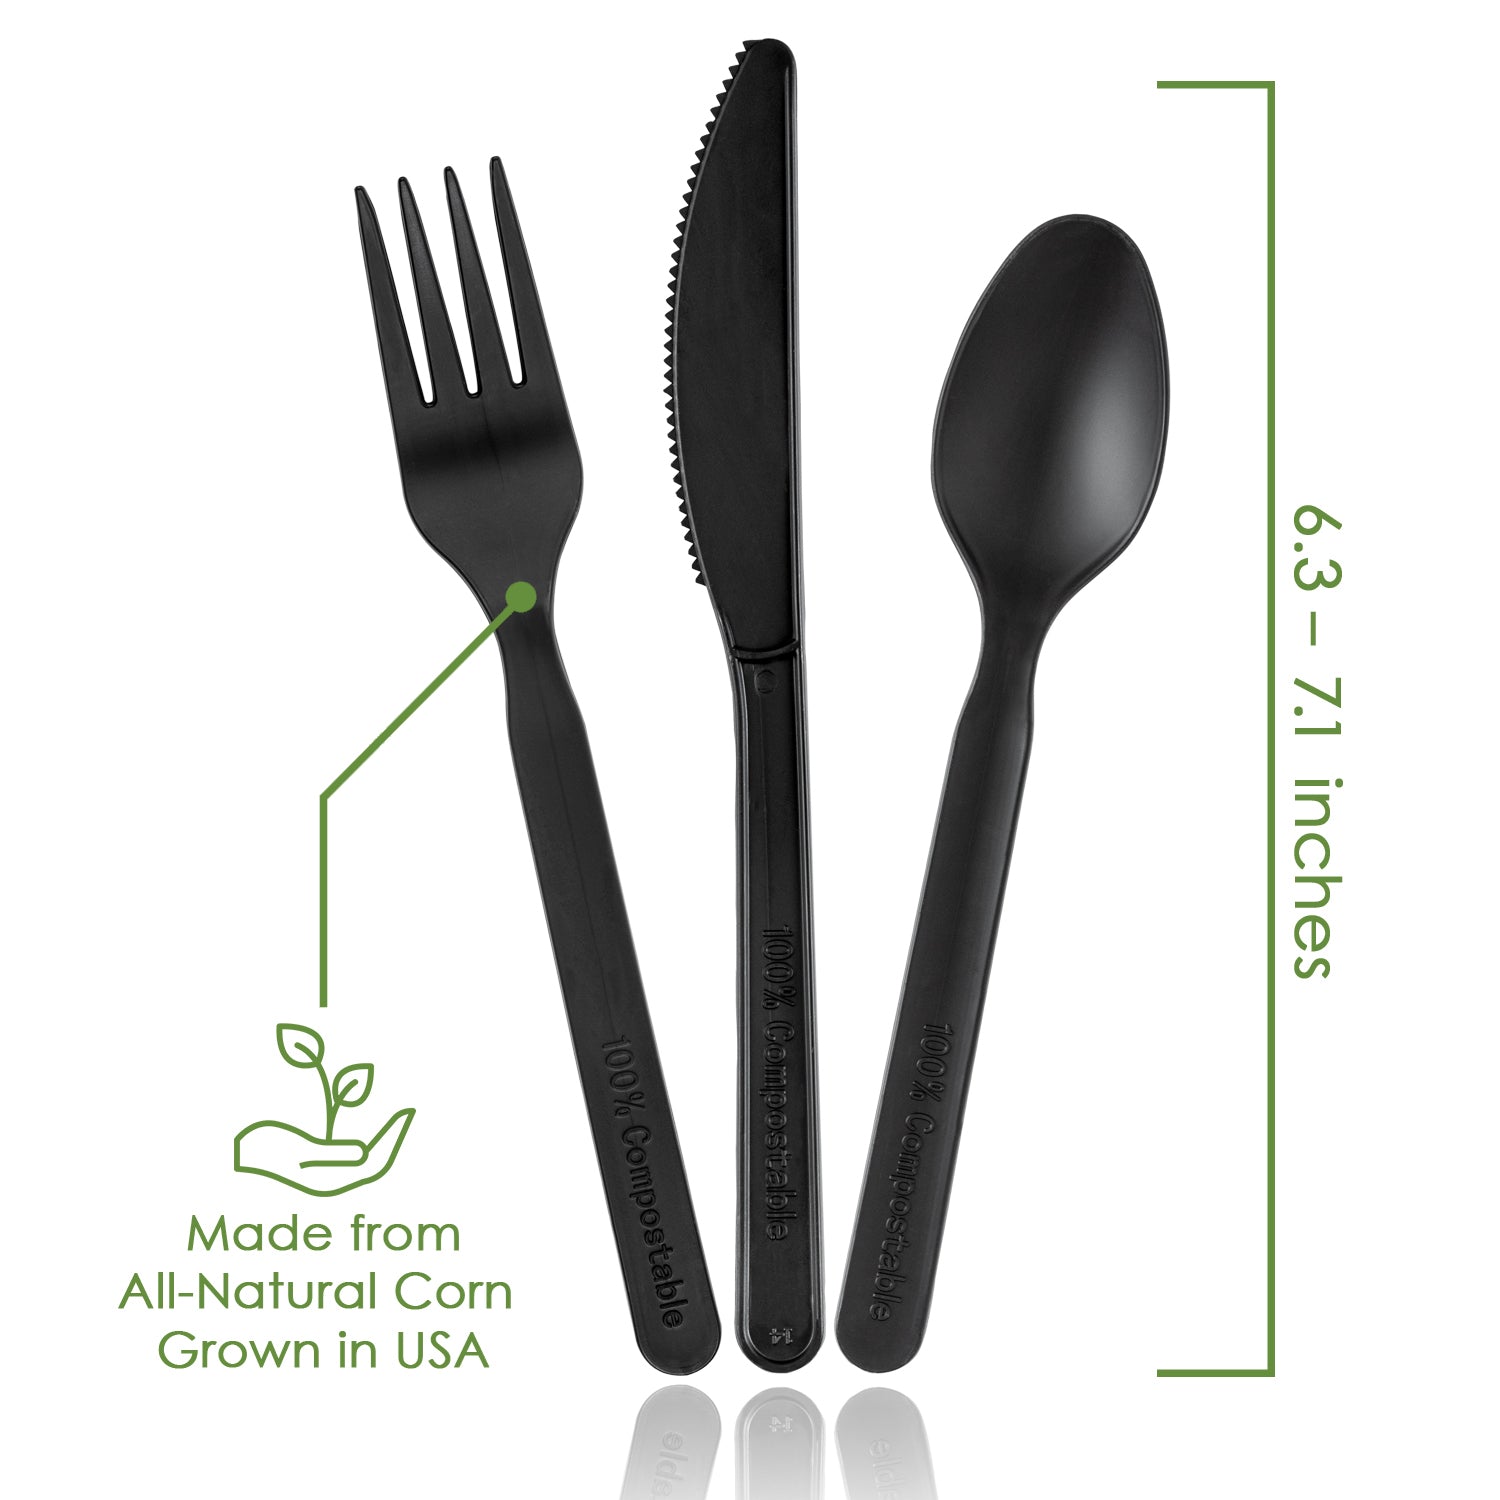 DecorWoo 300Pcs Compostable Paper Plates Set, Eco Party Plates &  Biodegradable Utensil Include Forks, Knives, Spoons, Napkins, Soak Proof  Disposable